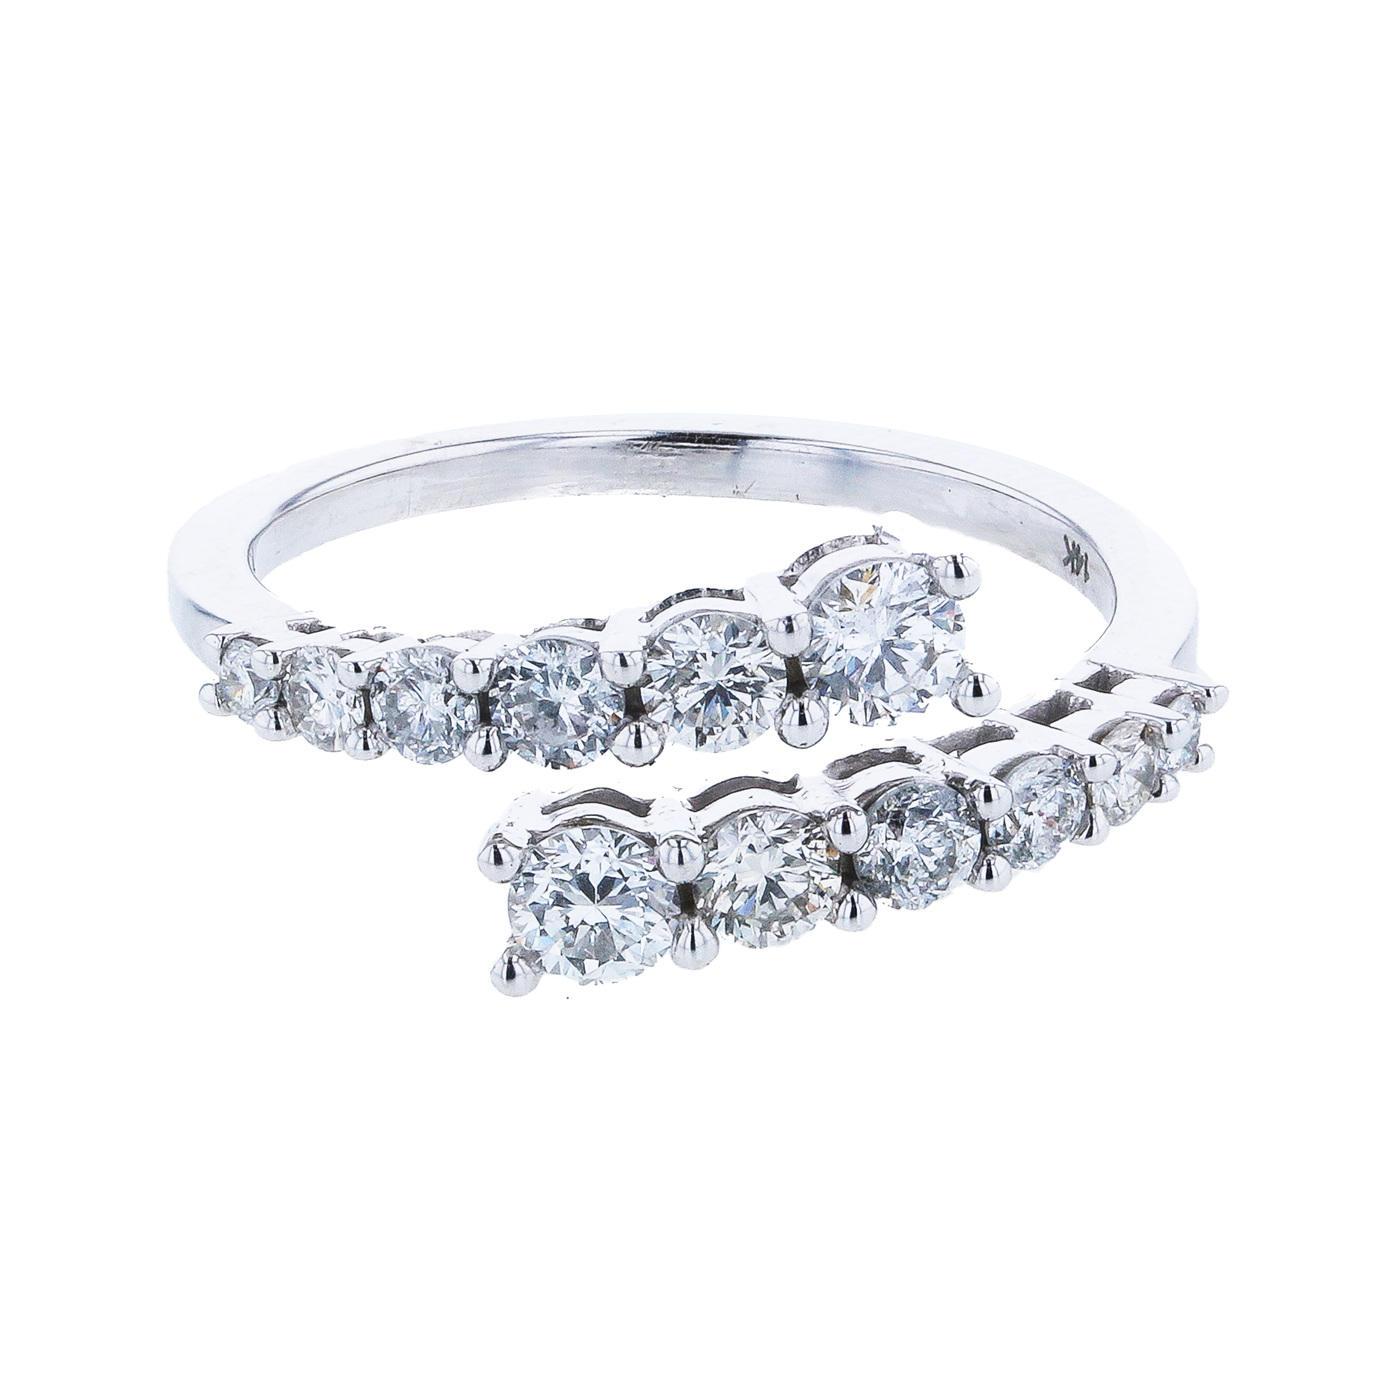 "In Your Arms" .95 CTTW Diamond Ring in 14K White Gold